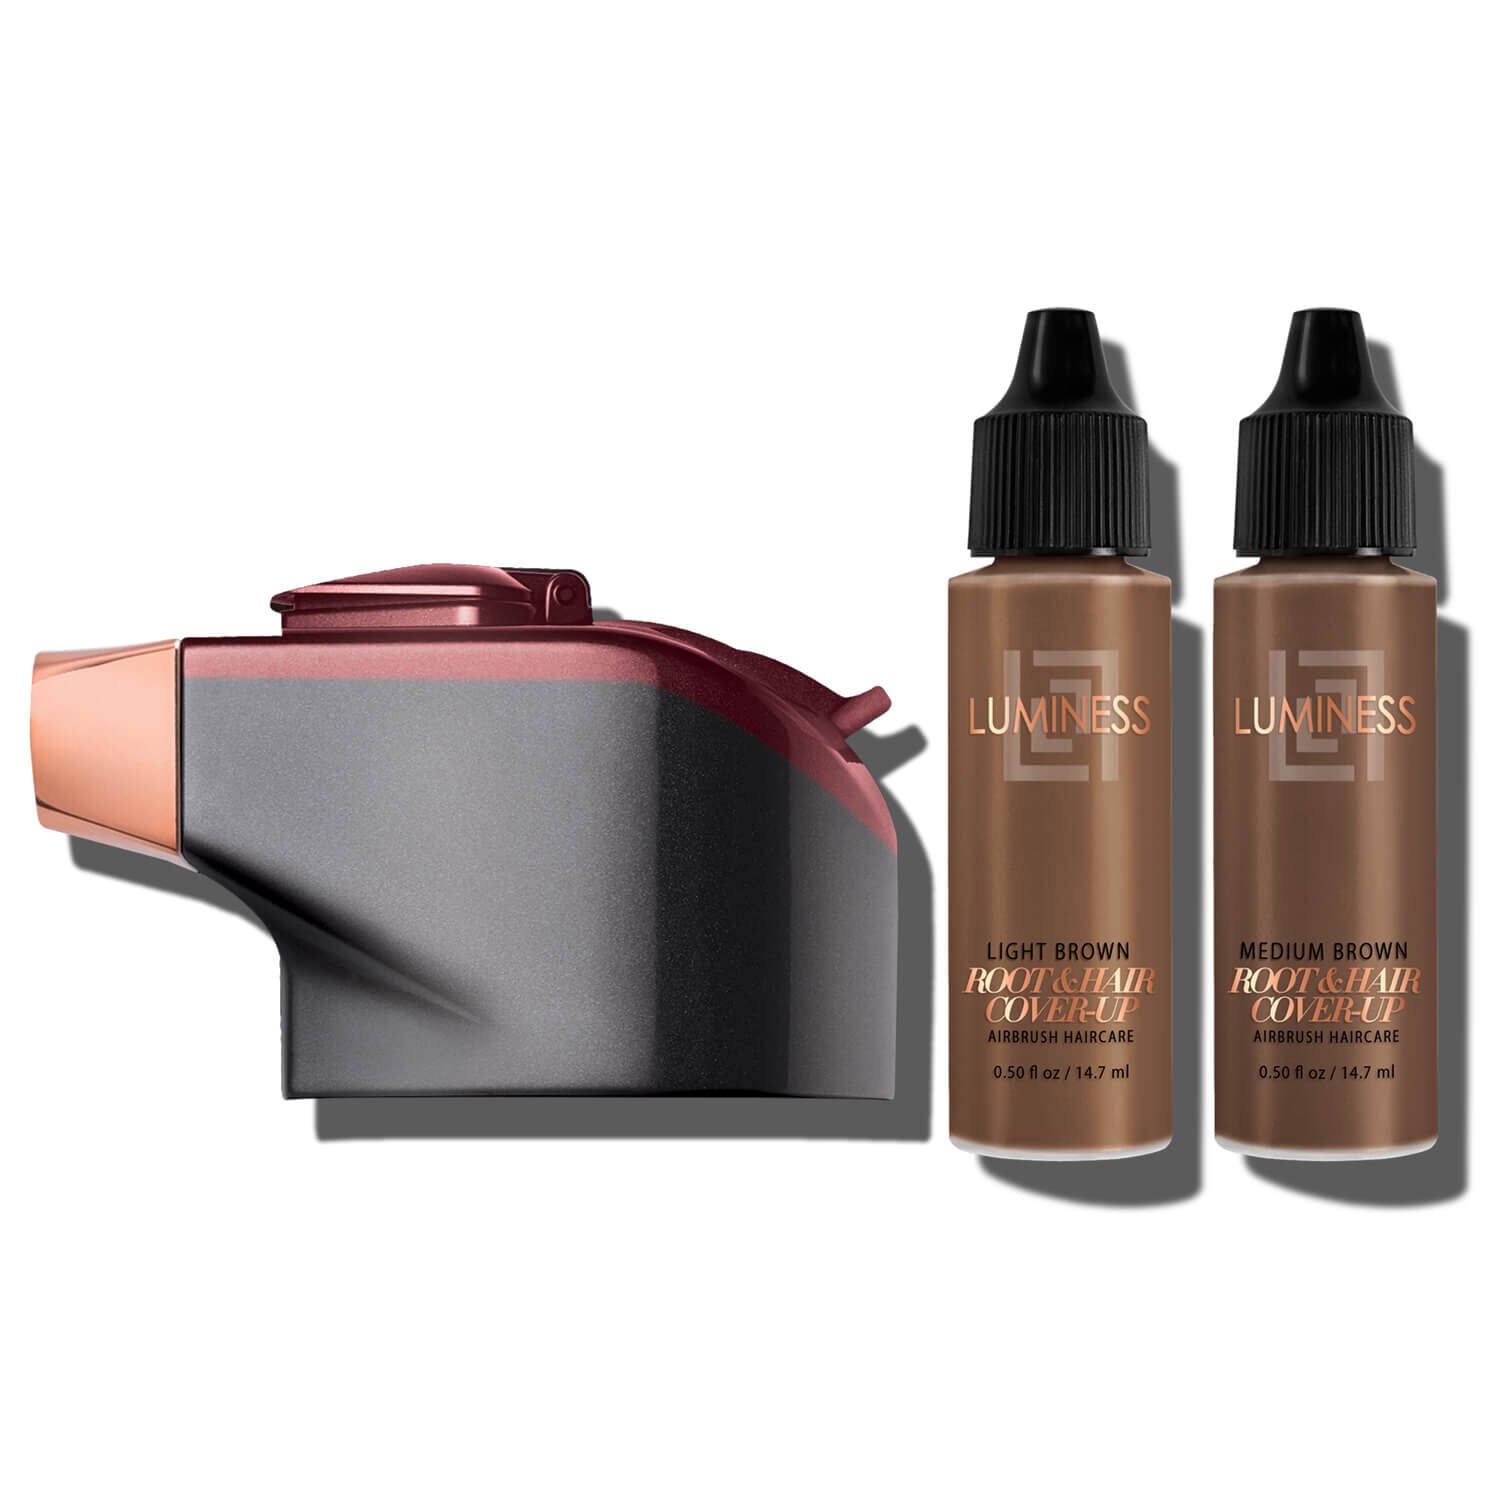 Luminess TechnIQue Airbrush Cosmetics System With 4 Shades And 1 final  sealer.